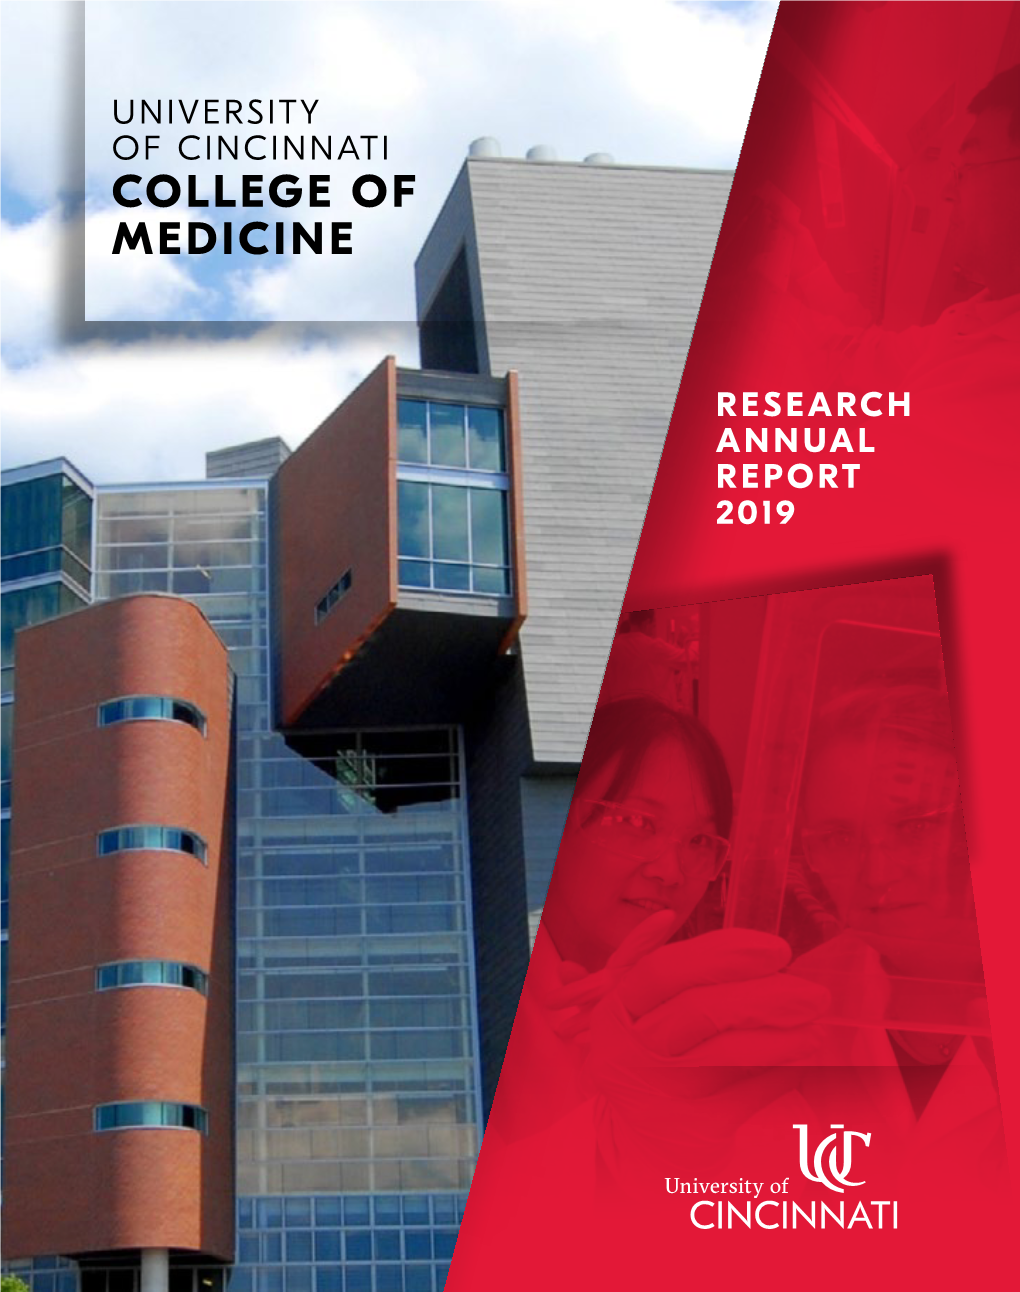 FY 2019 Research Annual Report